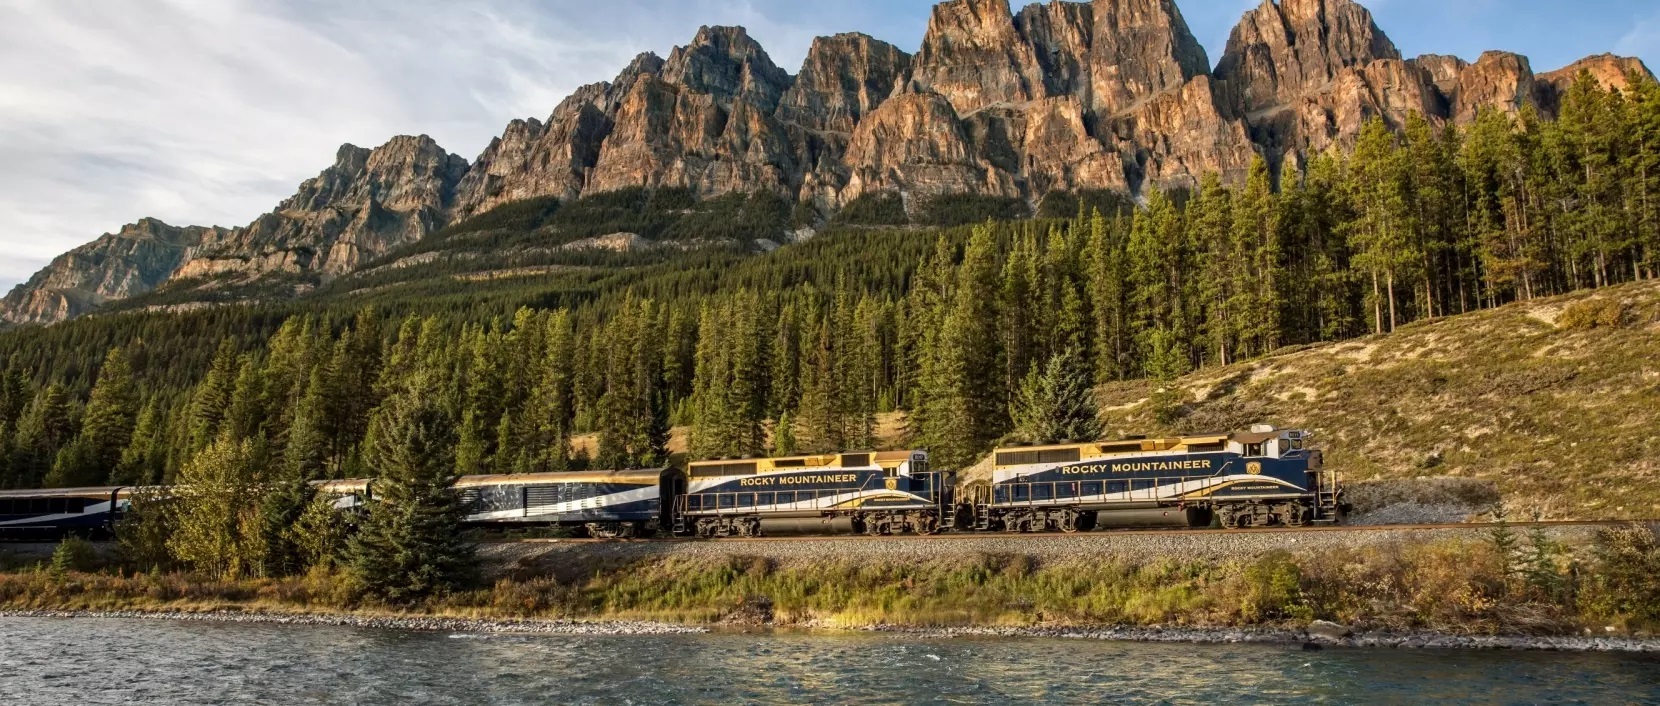 $1000 OFF Rocky Mountaineer!